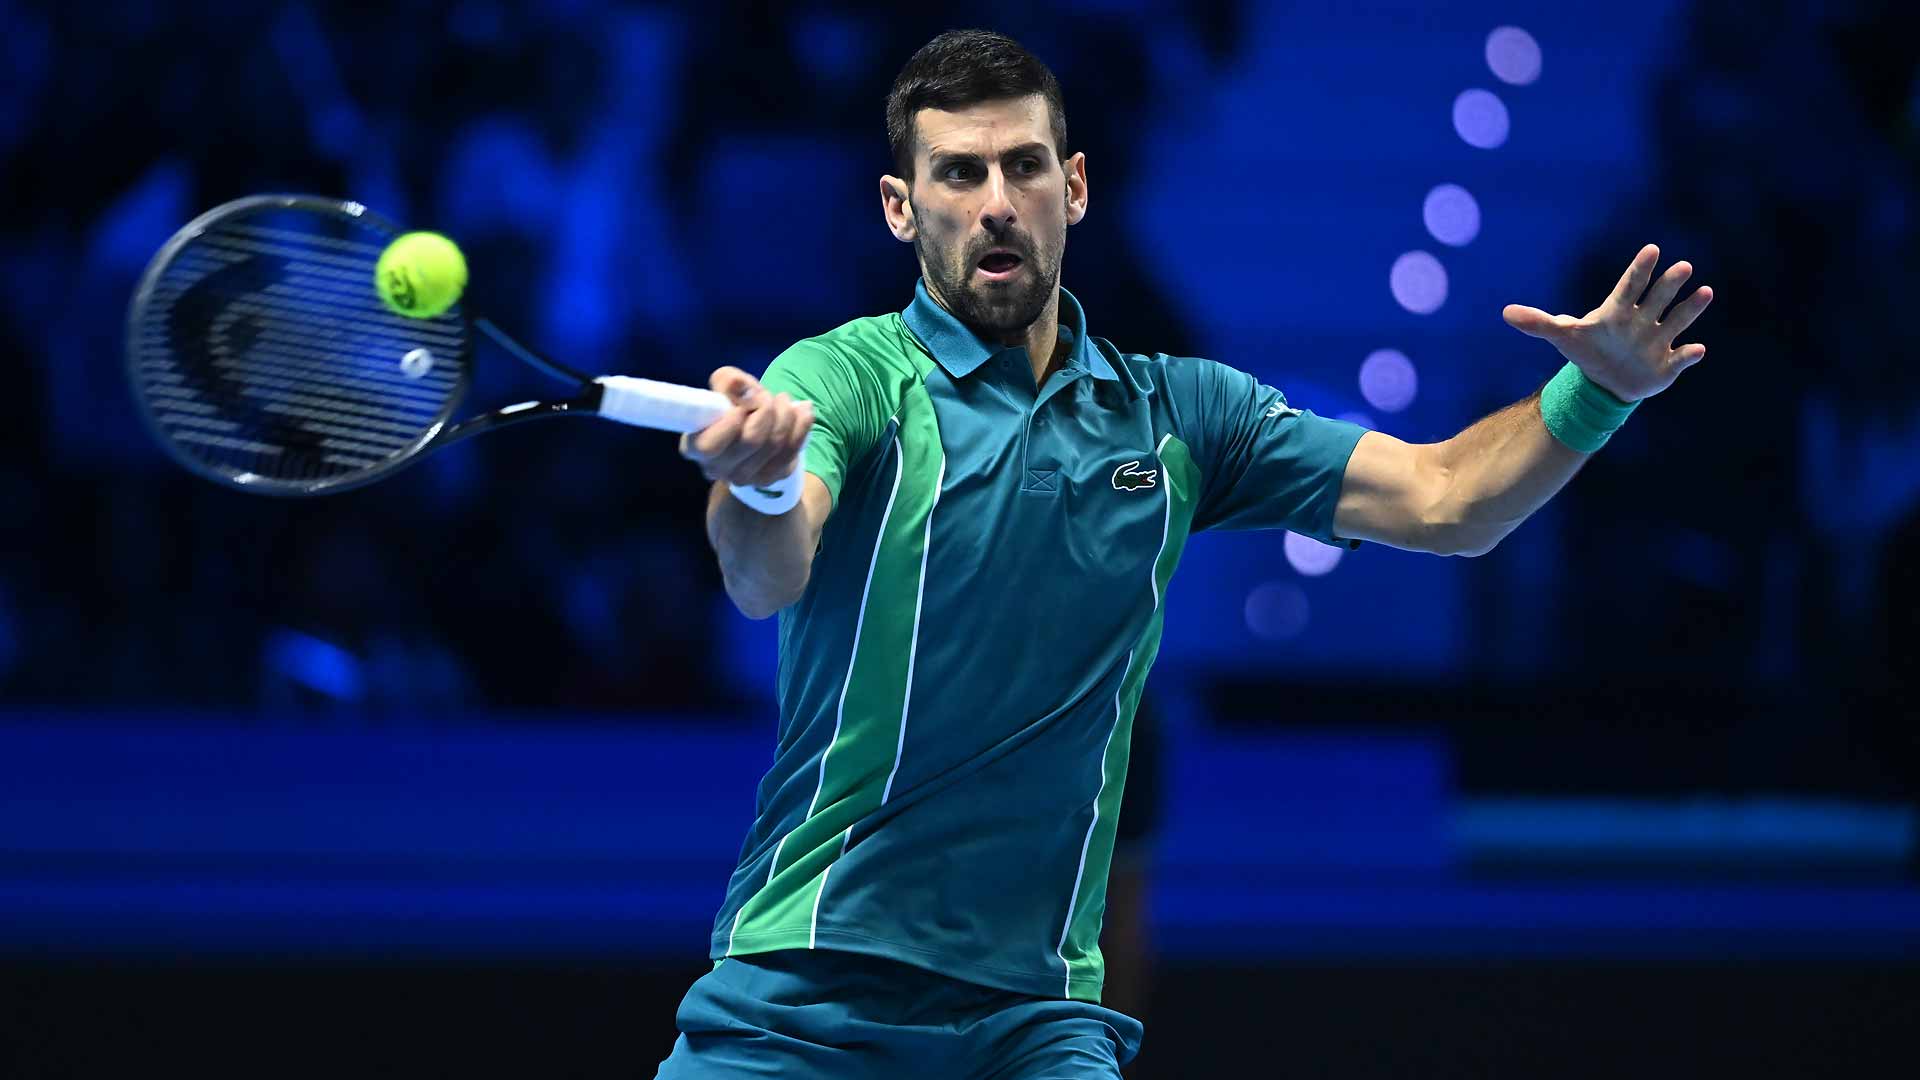 Novak Djokovic defeats Hubert Hurkacz in three sets to finish 2-1 in Green Group play at the Nitto ATP Finals.